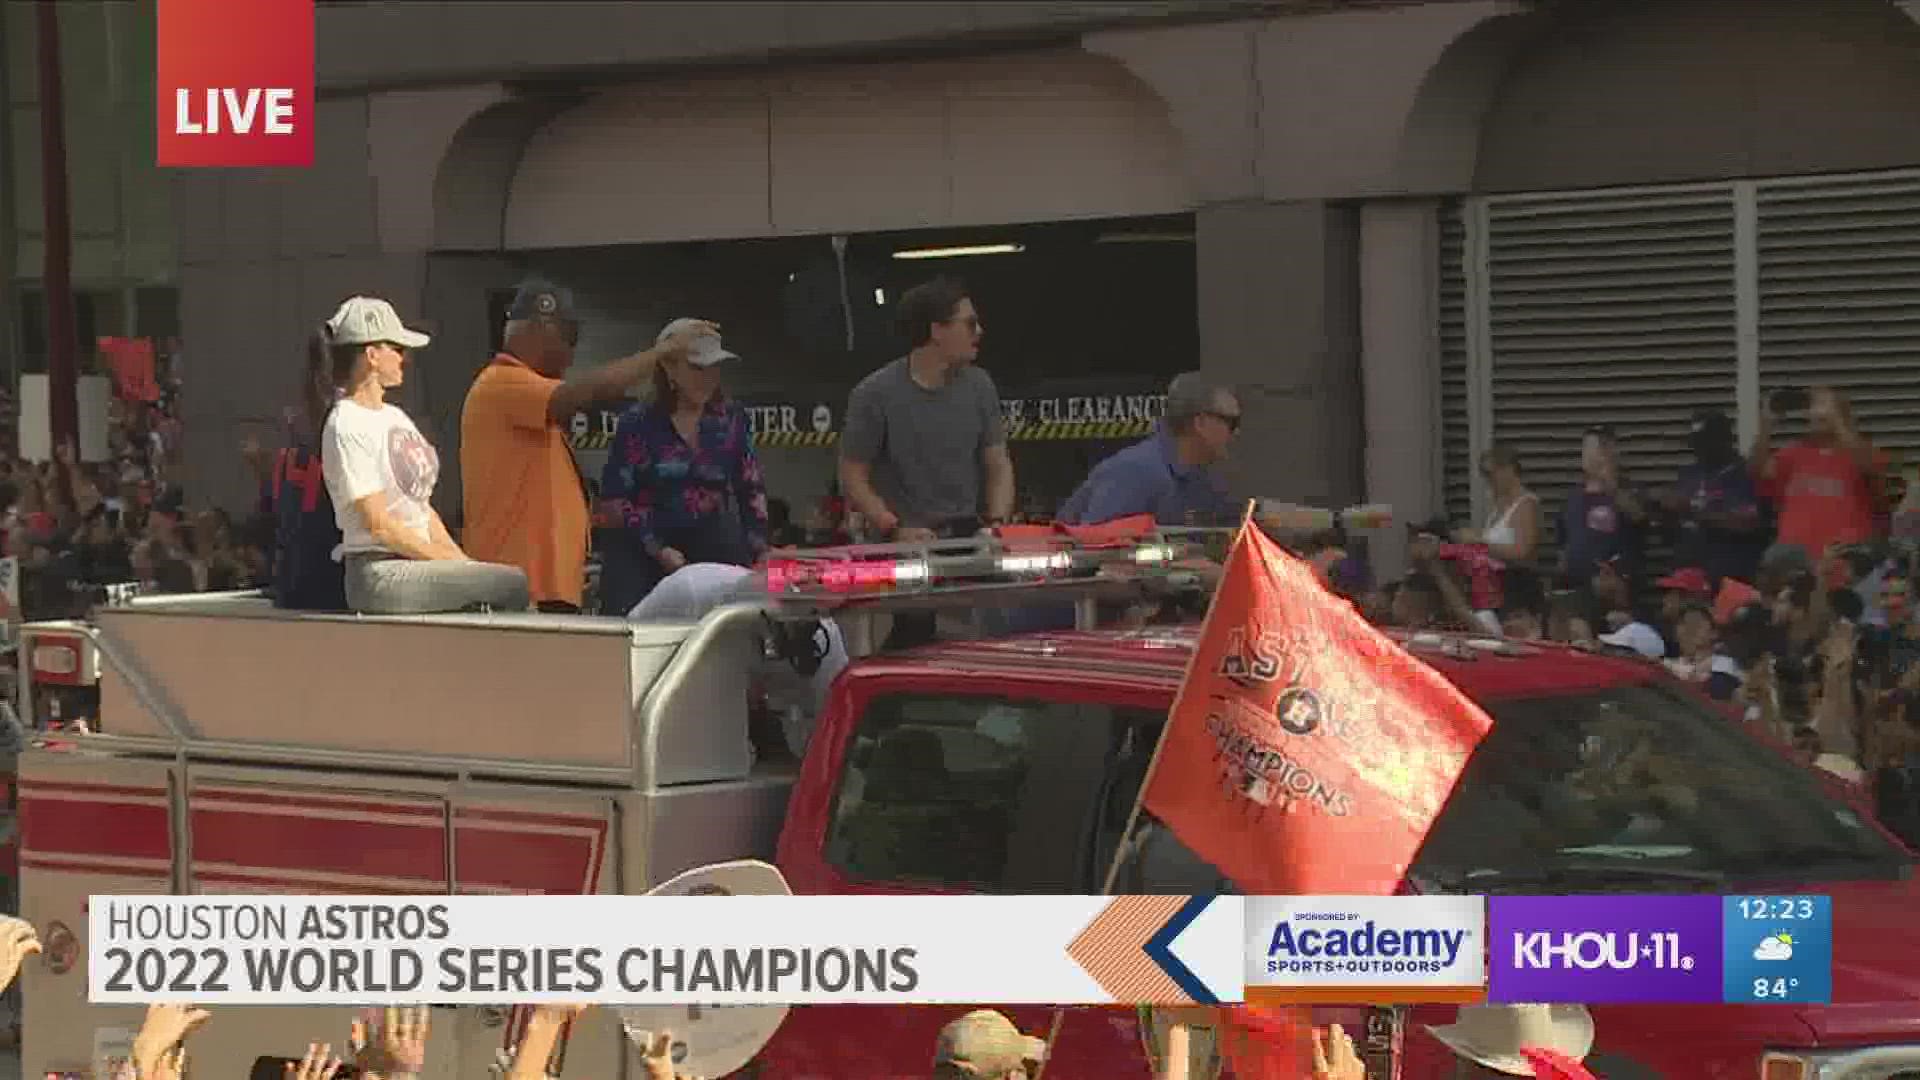 Houston Astros legends Craig Biggio and Jeff Bagwell at World Series parade